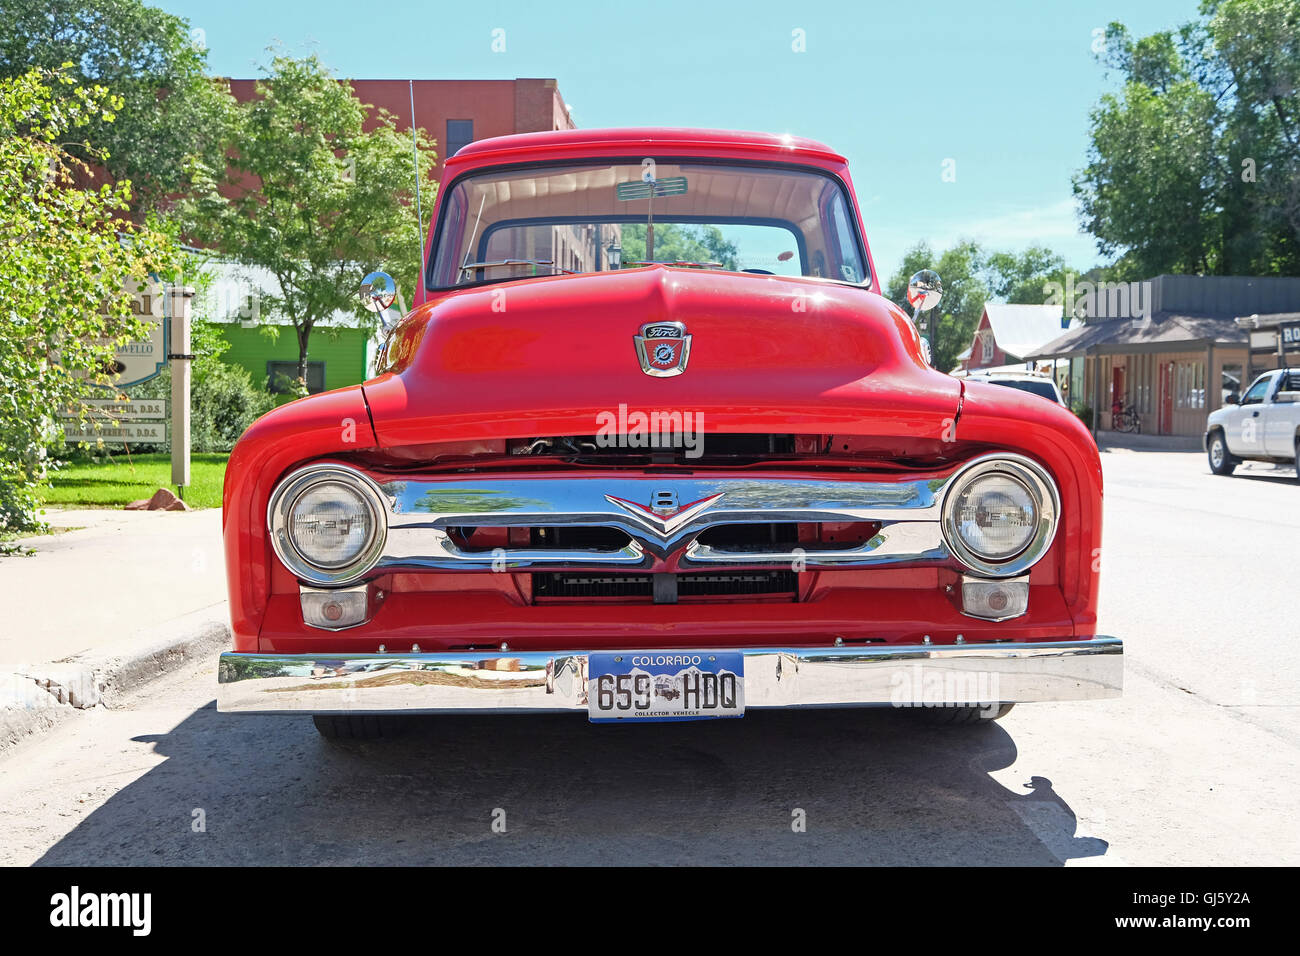 Rouge lumineux Vintage Ford F100 pick-up Truck Banque D'Images